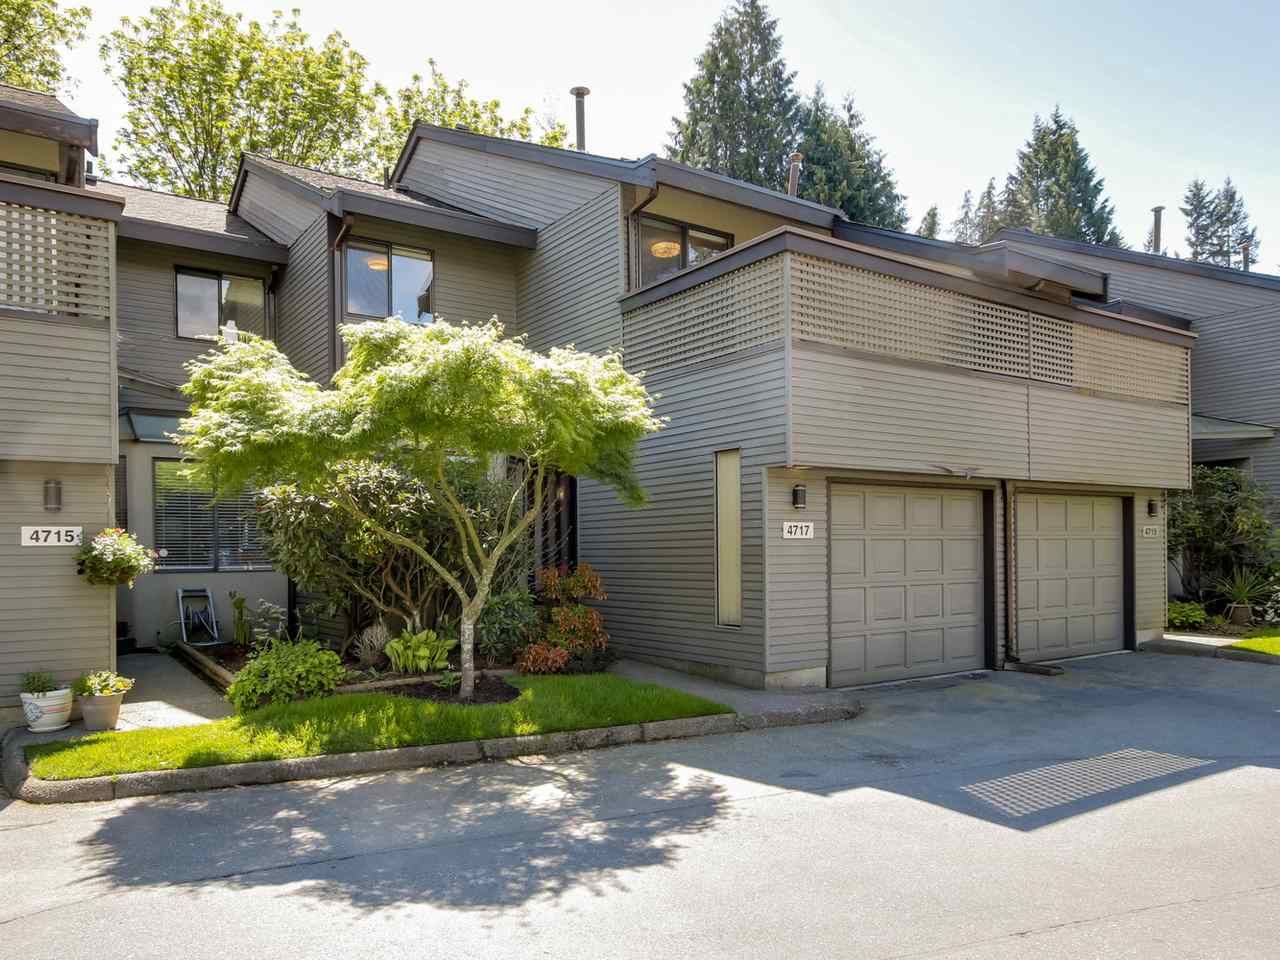 Main Photo: 4717 GLENWOOD Avenue in North Vancouver: Canyon Heights NV Townhouse for sale : MLS®# R2062249